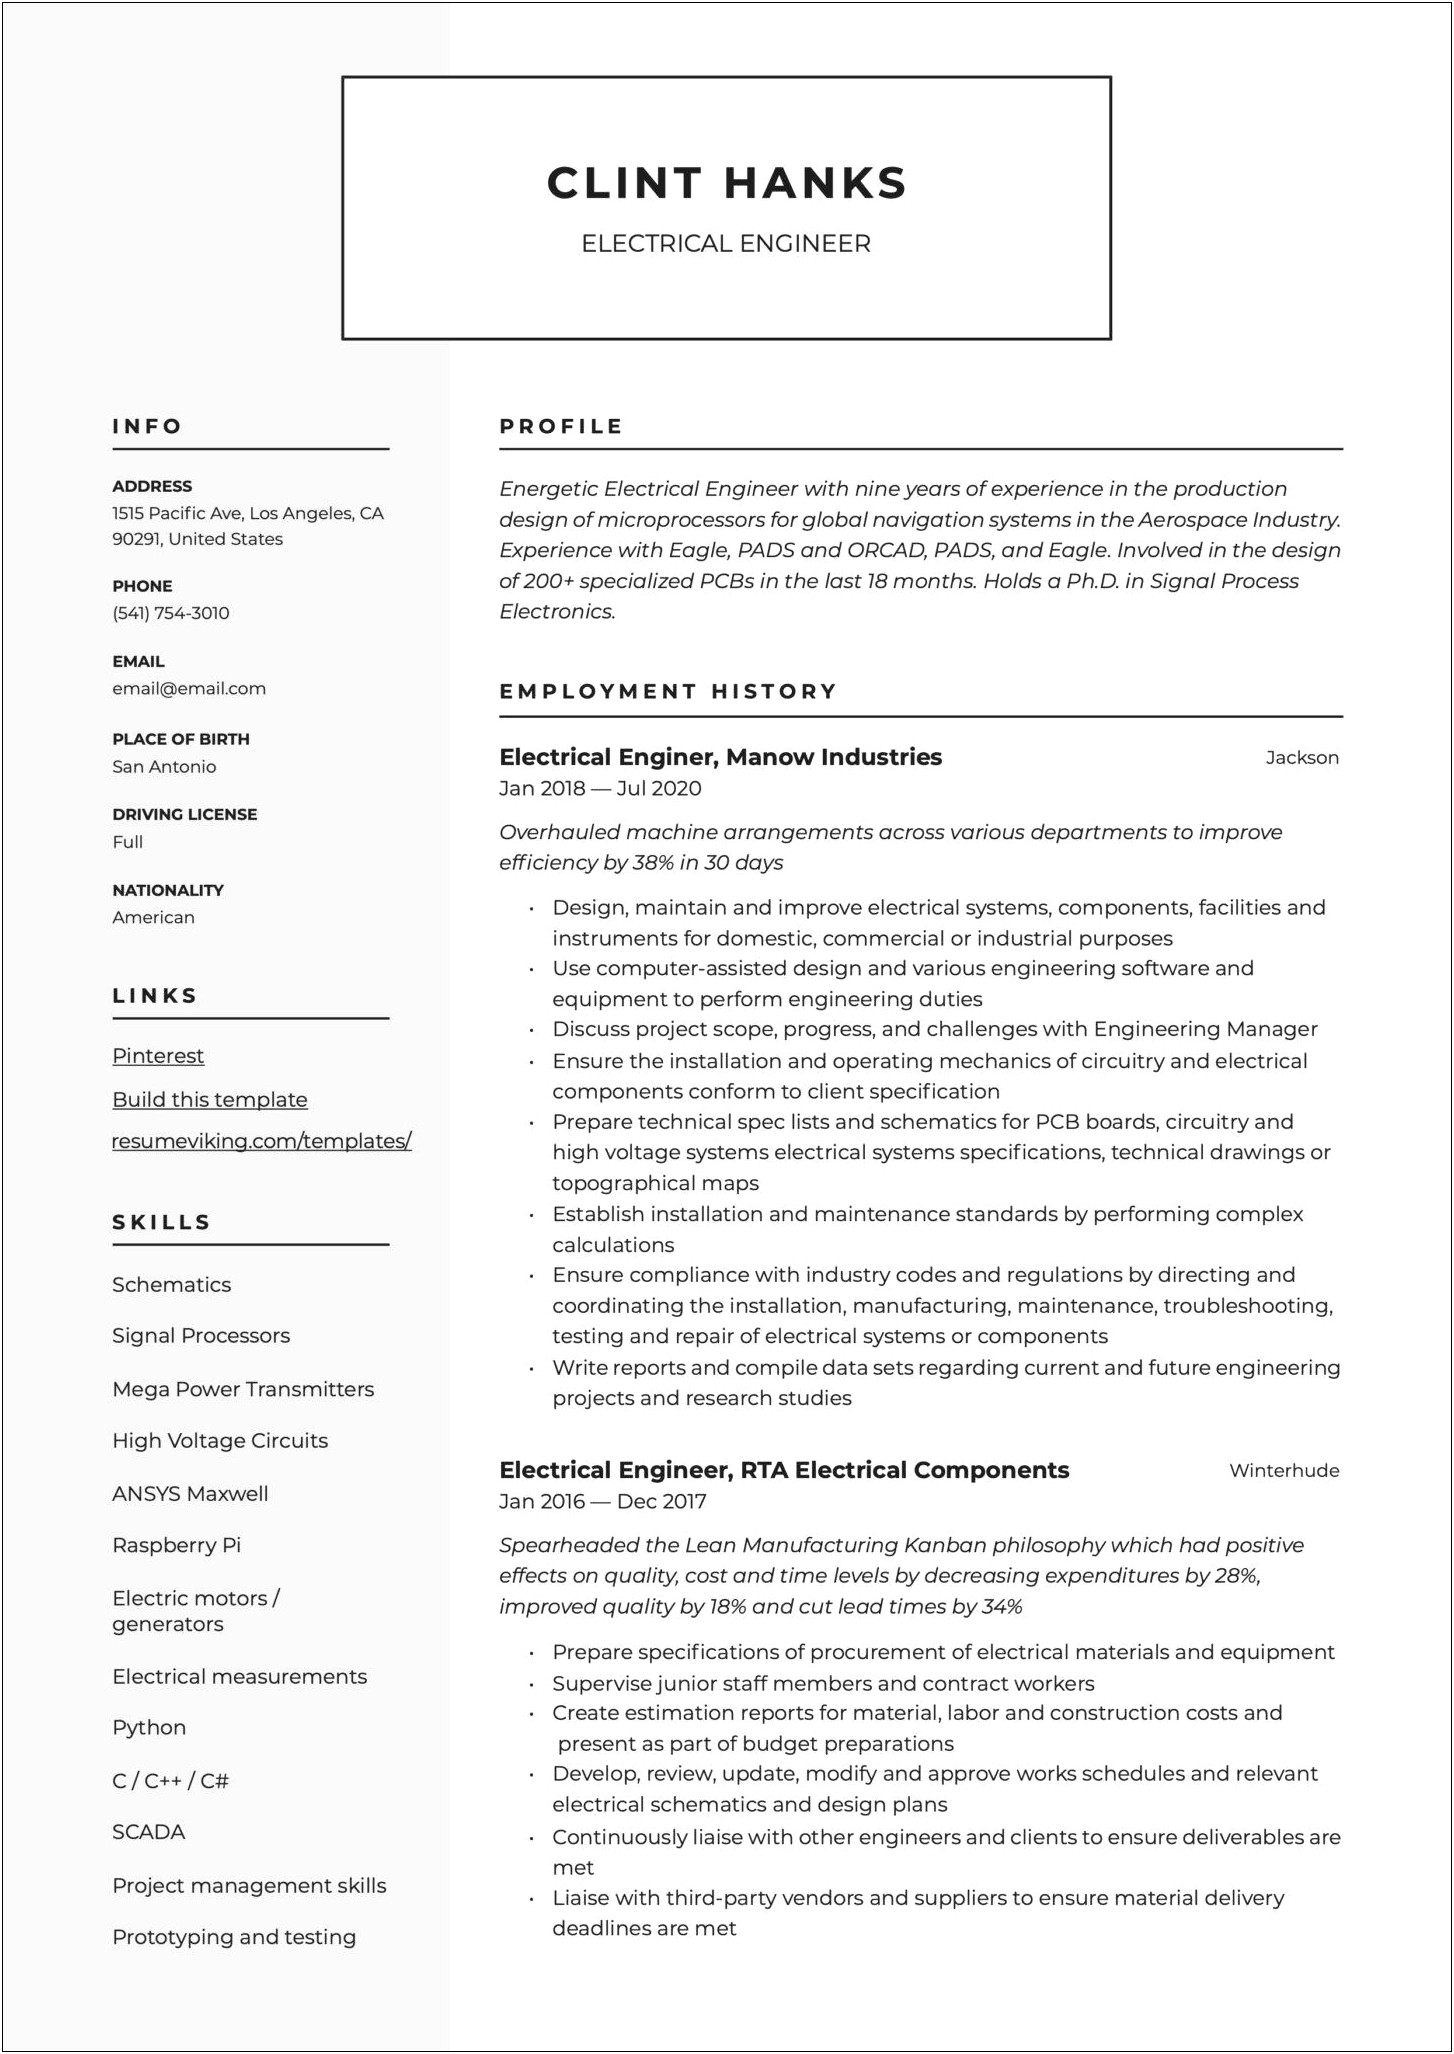 Sample Us Electrical Engineer Applicant Resumes